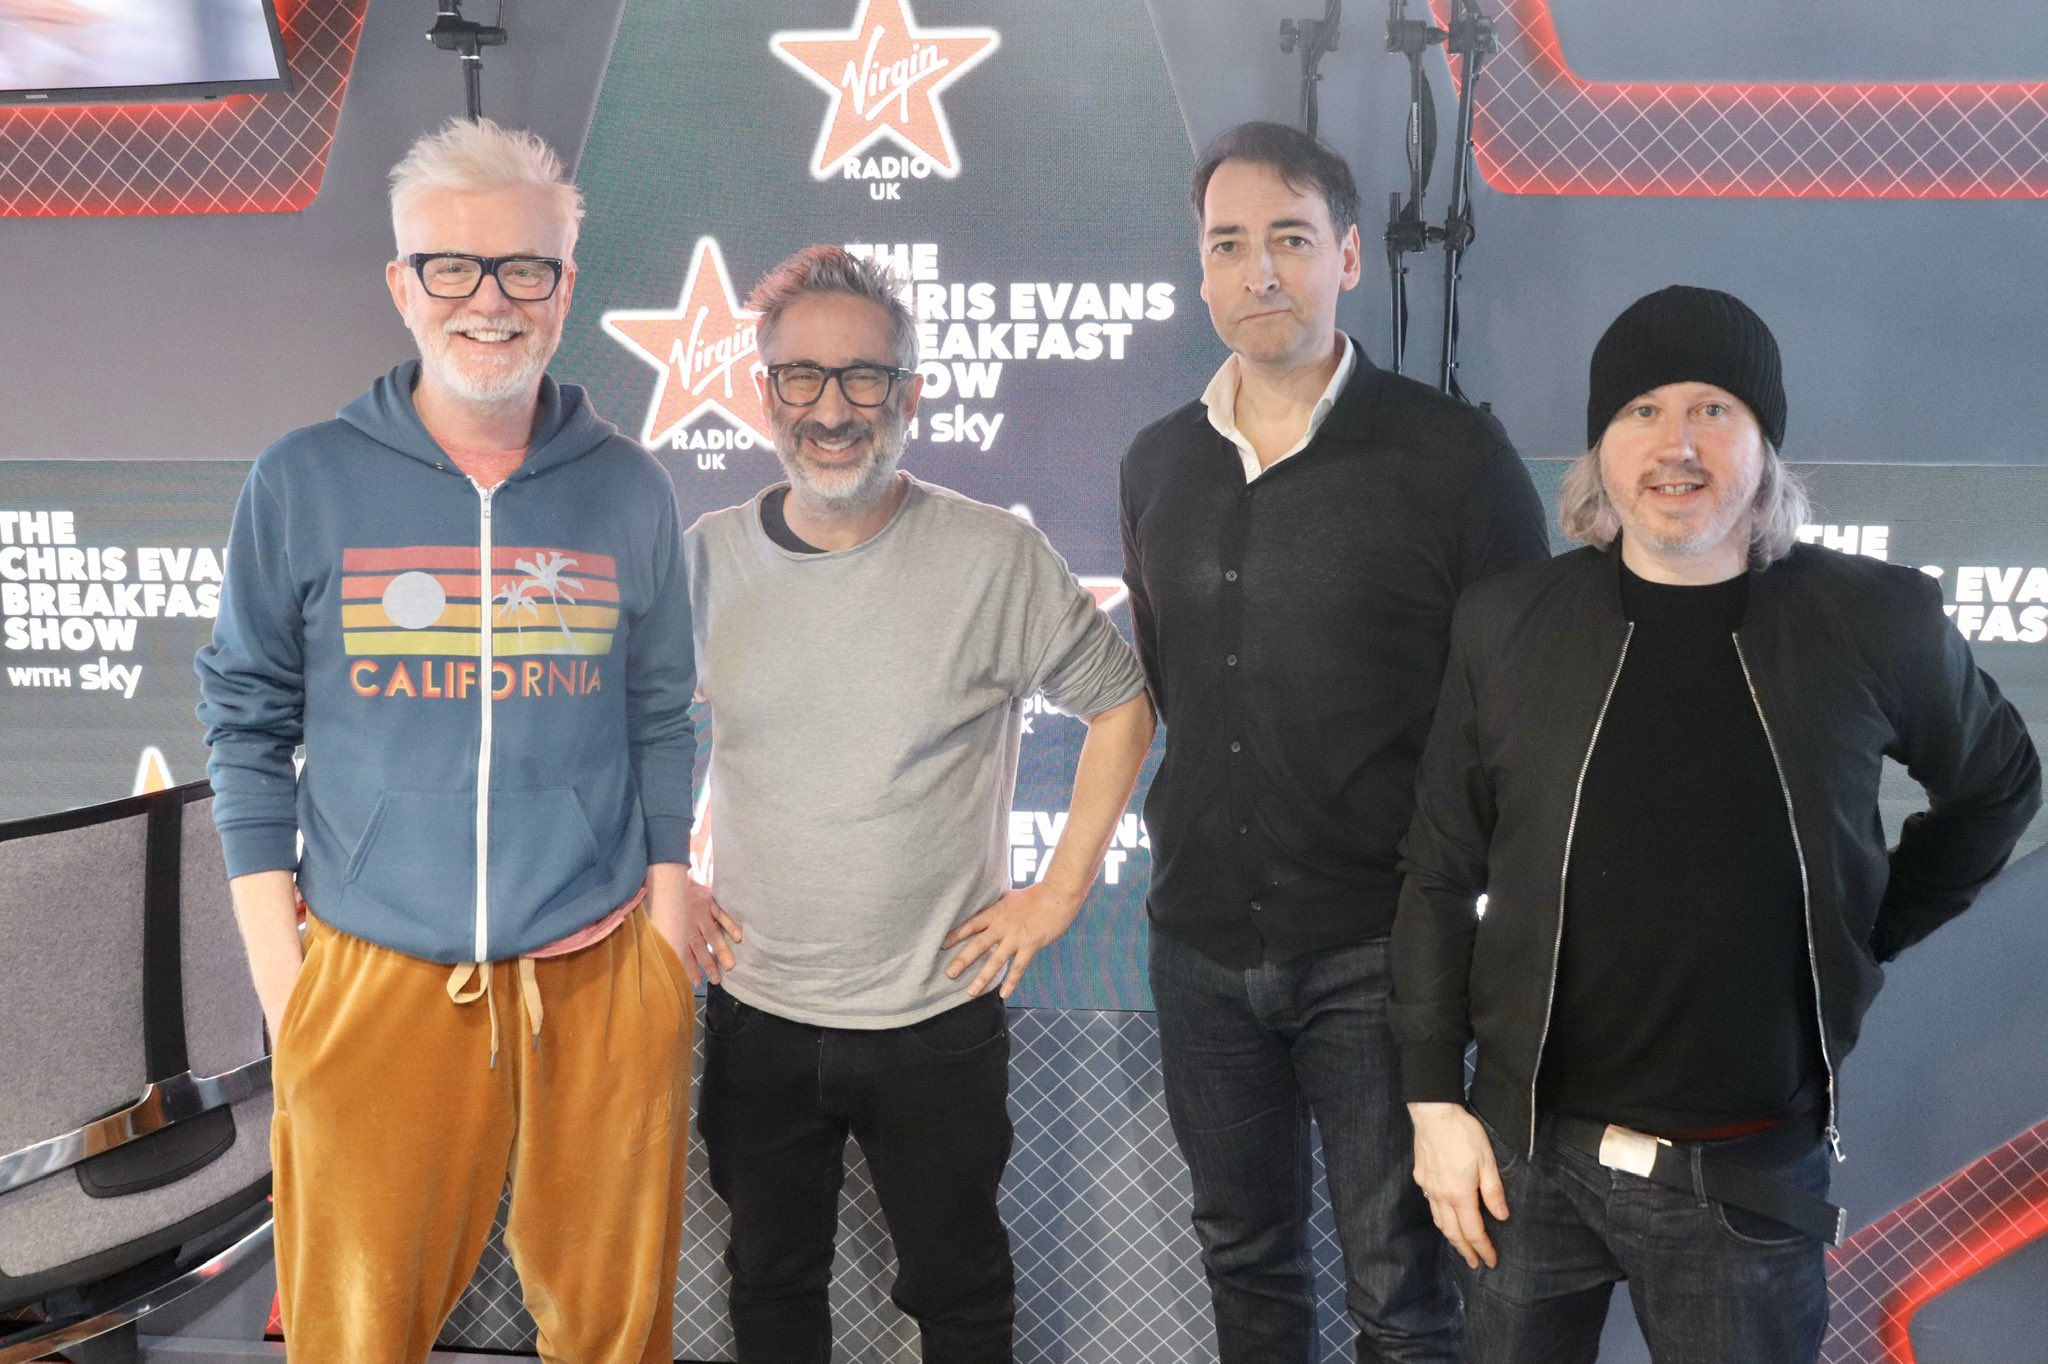 Le Live de la semaine – Badly Drawn Boy – This Is The Day (Live On The Chris Evans Breakfast Show with Sky)